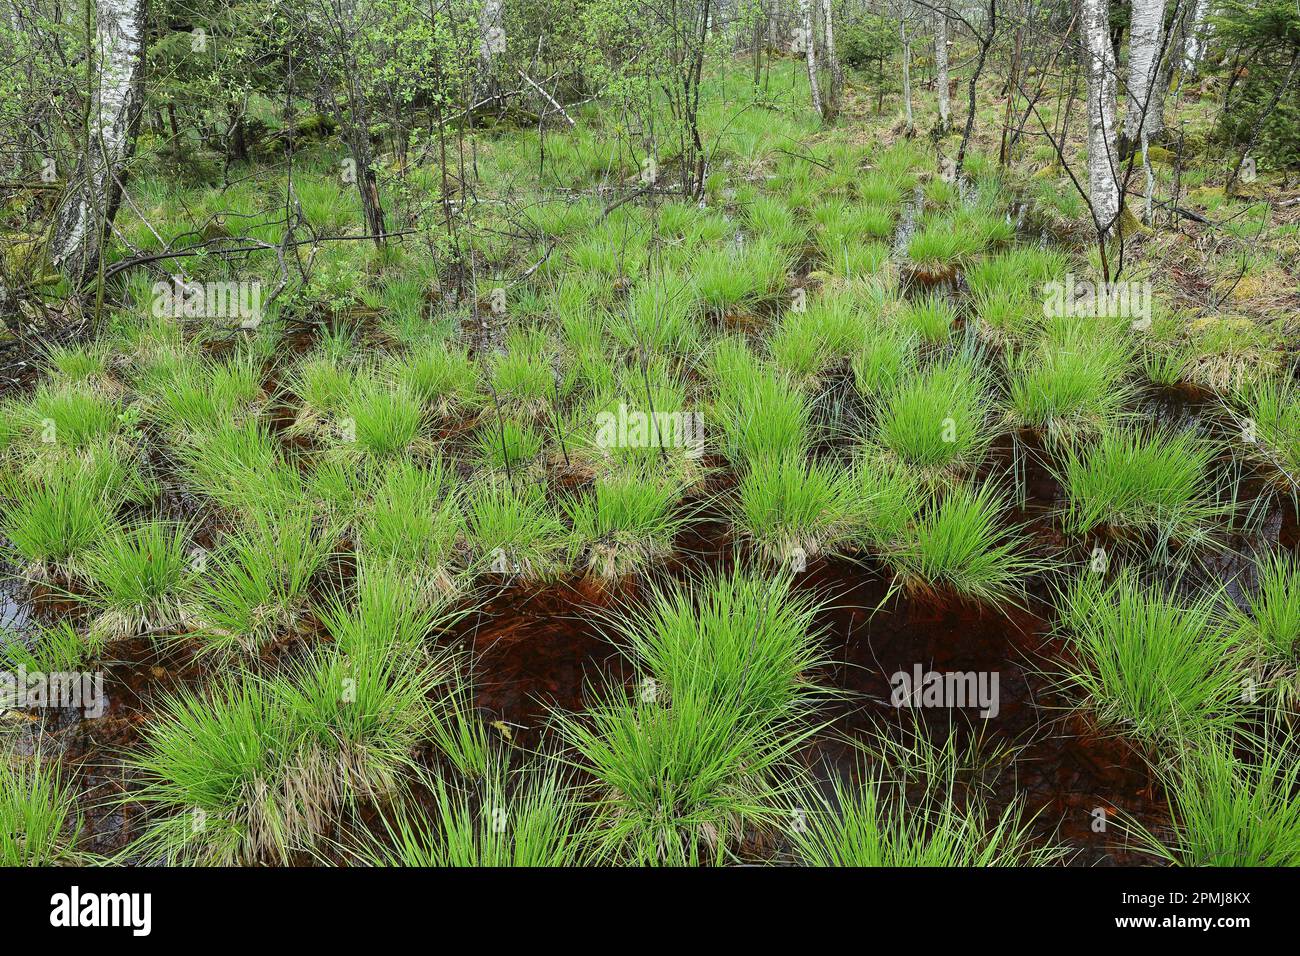 Birch forest, Sedges (Carex) protected forest, protection forest, forest reserve, moor water, Pfrunger-Burgweiler Ried, Baden-Wuerttemberg, Germany Stock Photo